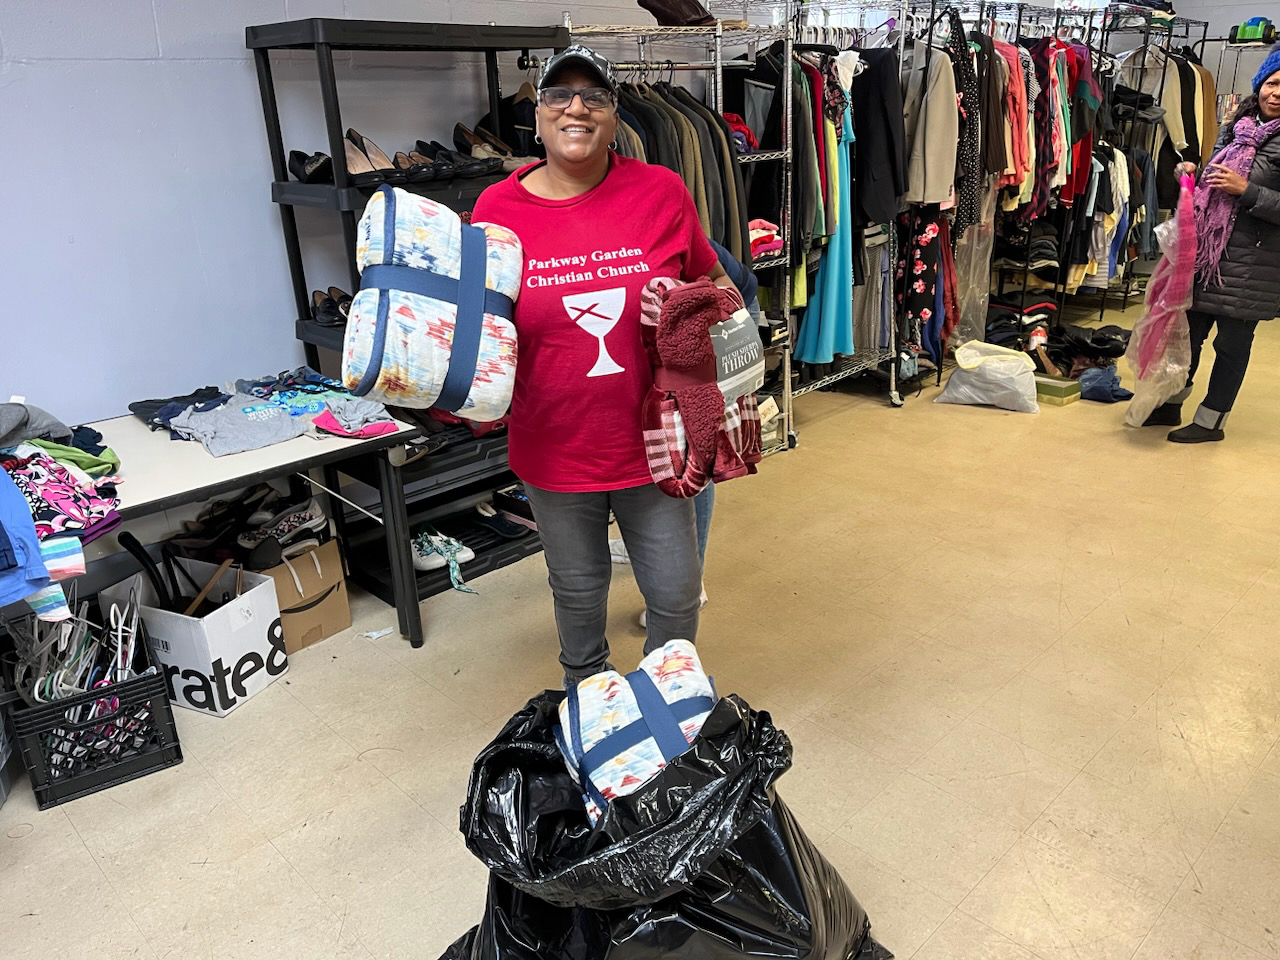 Items collected for the clothing drive at Parkway Gardens Christian Church in the Woodlawn neighborhood of Chicago. (Photo courtesy of Parkway Garden Christian Church)